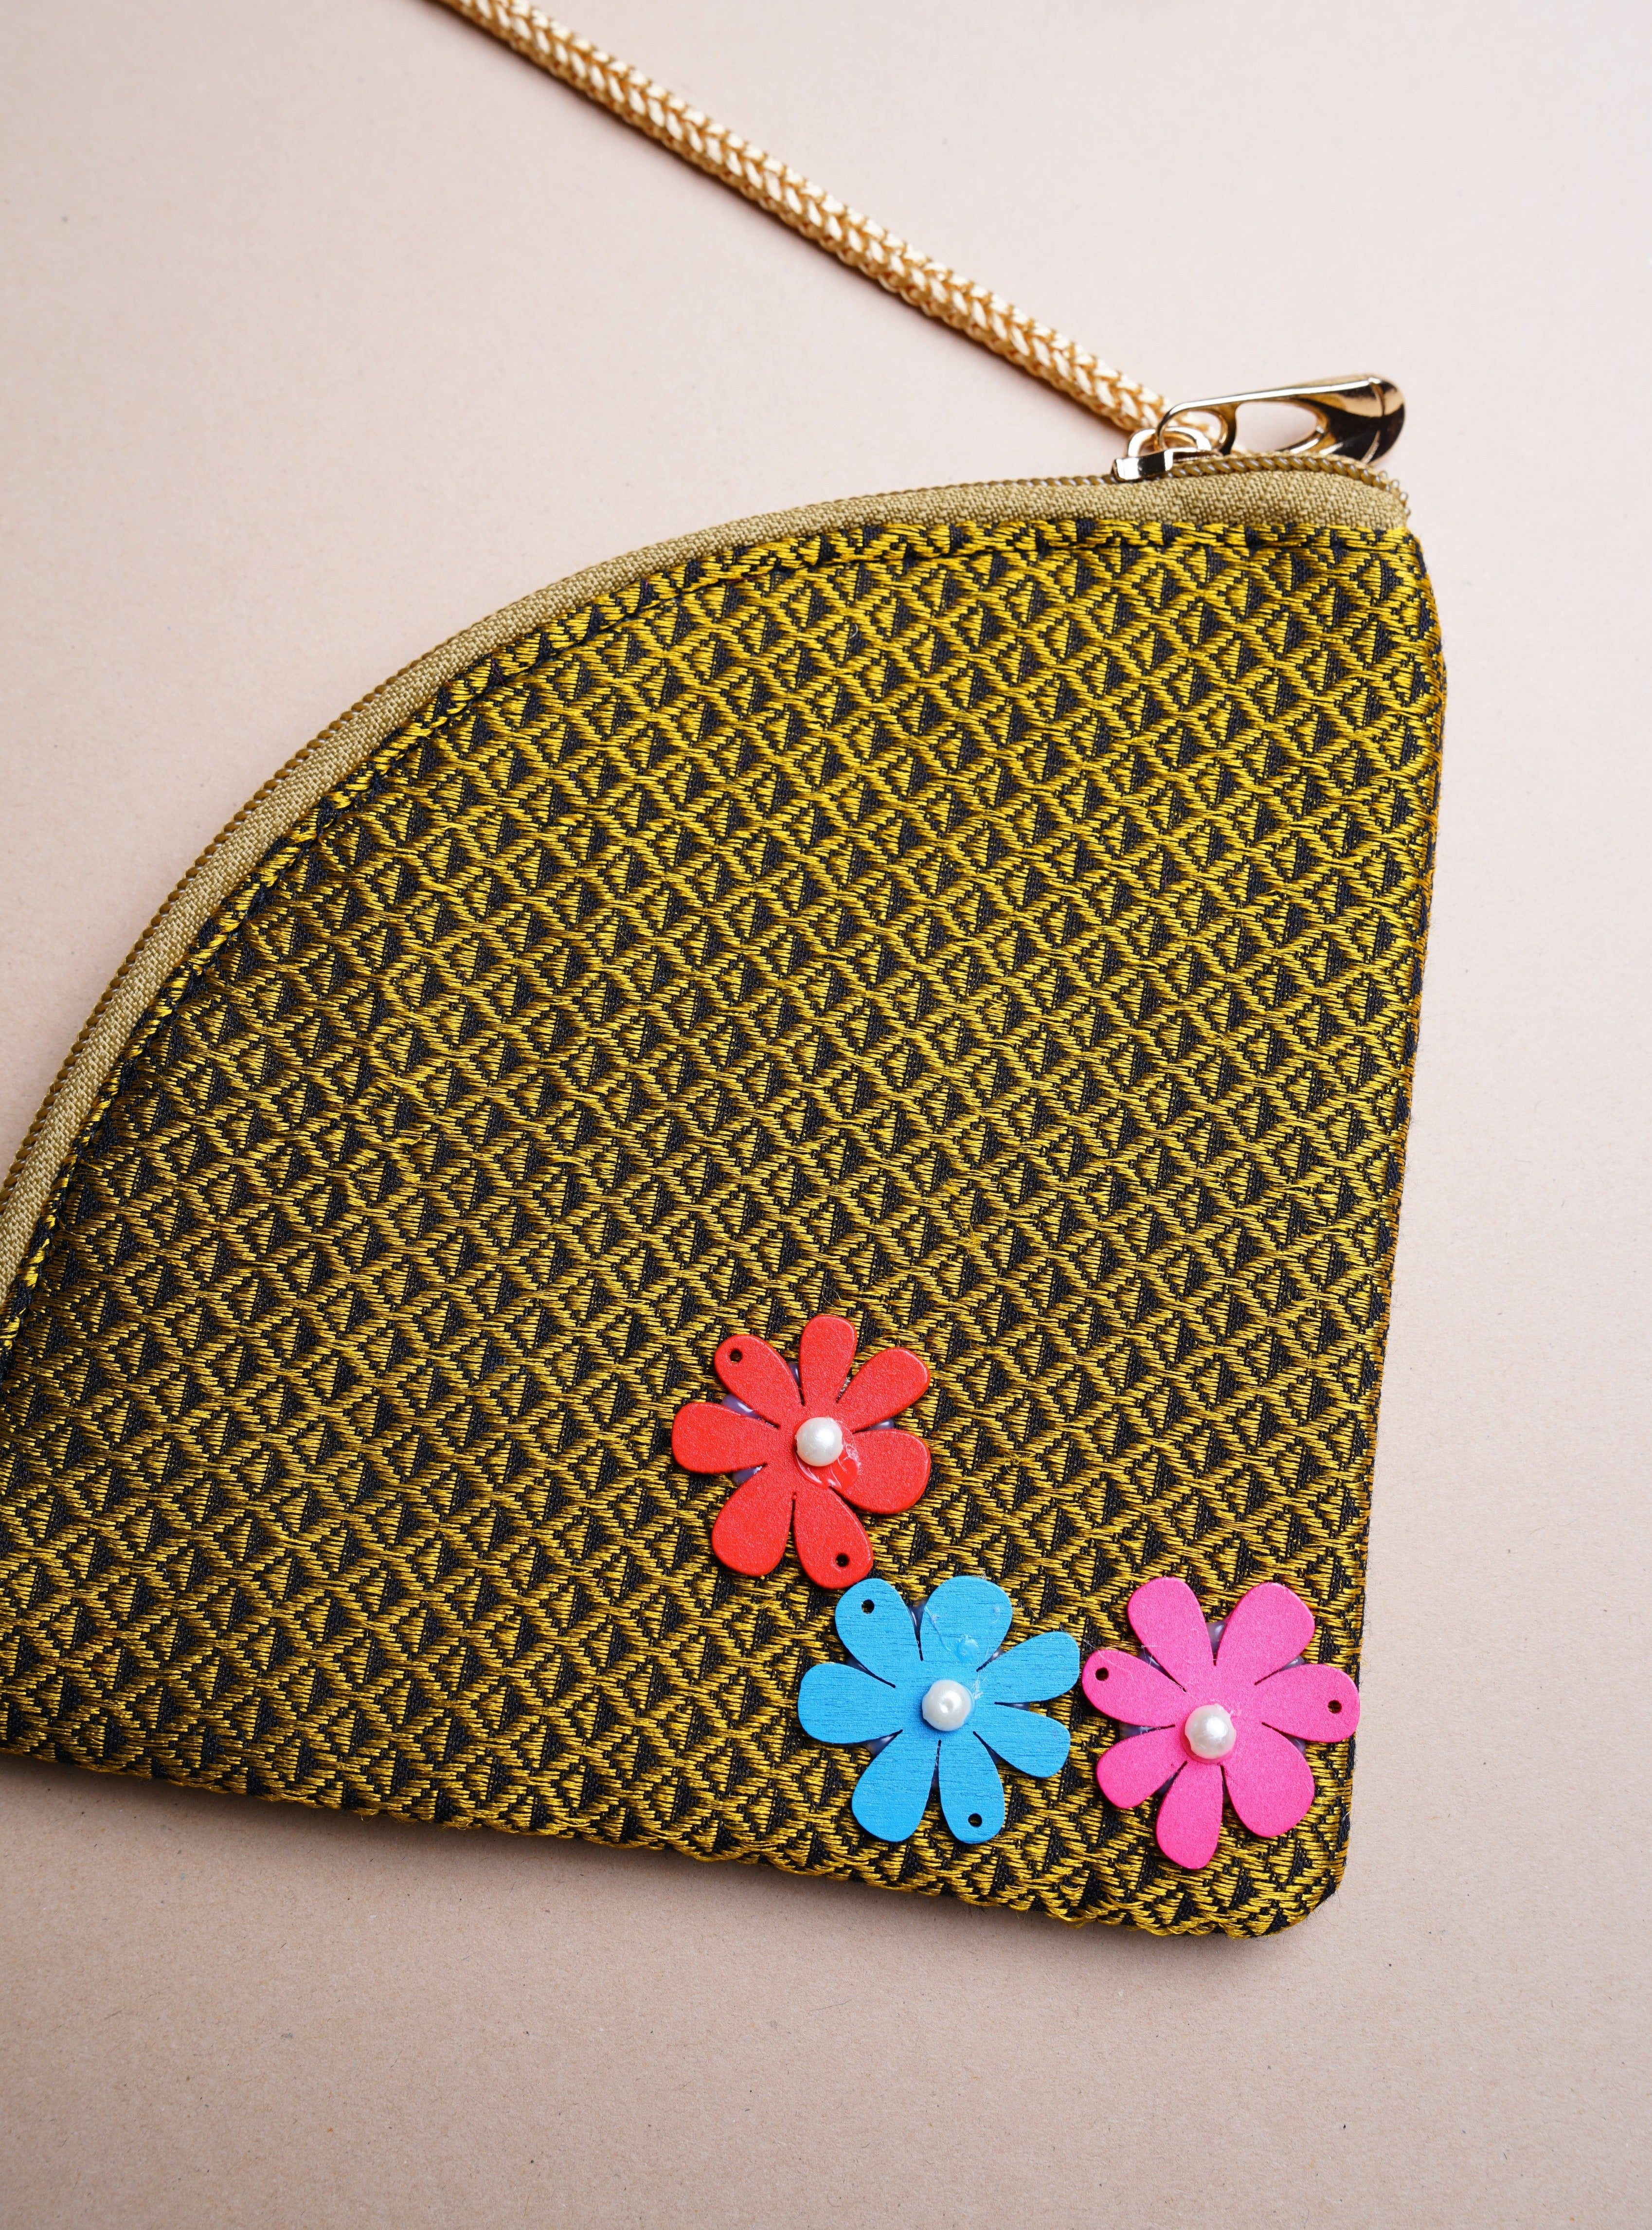 Buy Olive Green Clutch In Suede With Zardosi Embroidered Floral Motifs  Online - Kalki Fashion